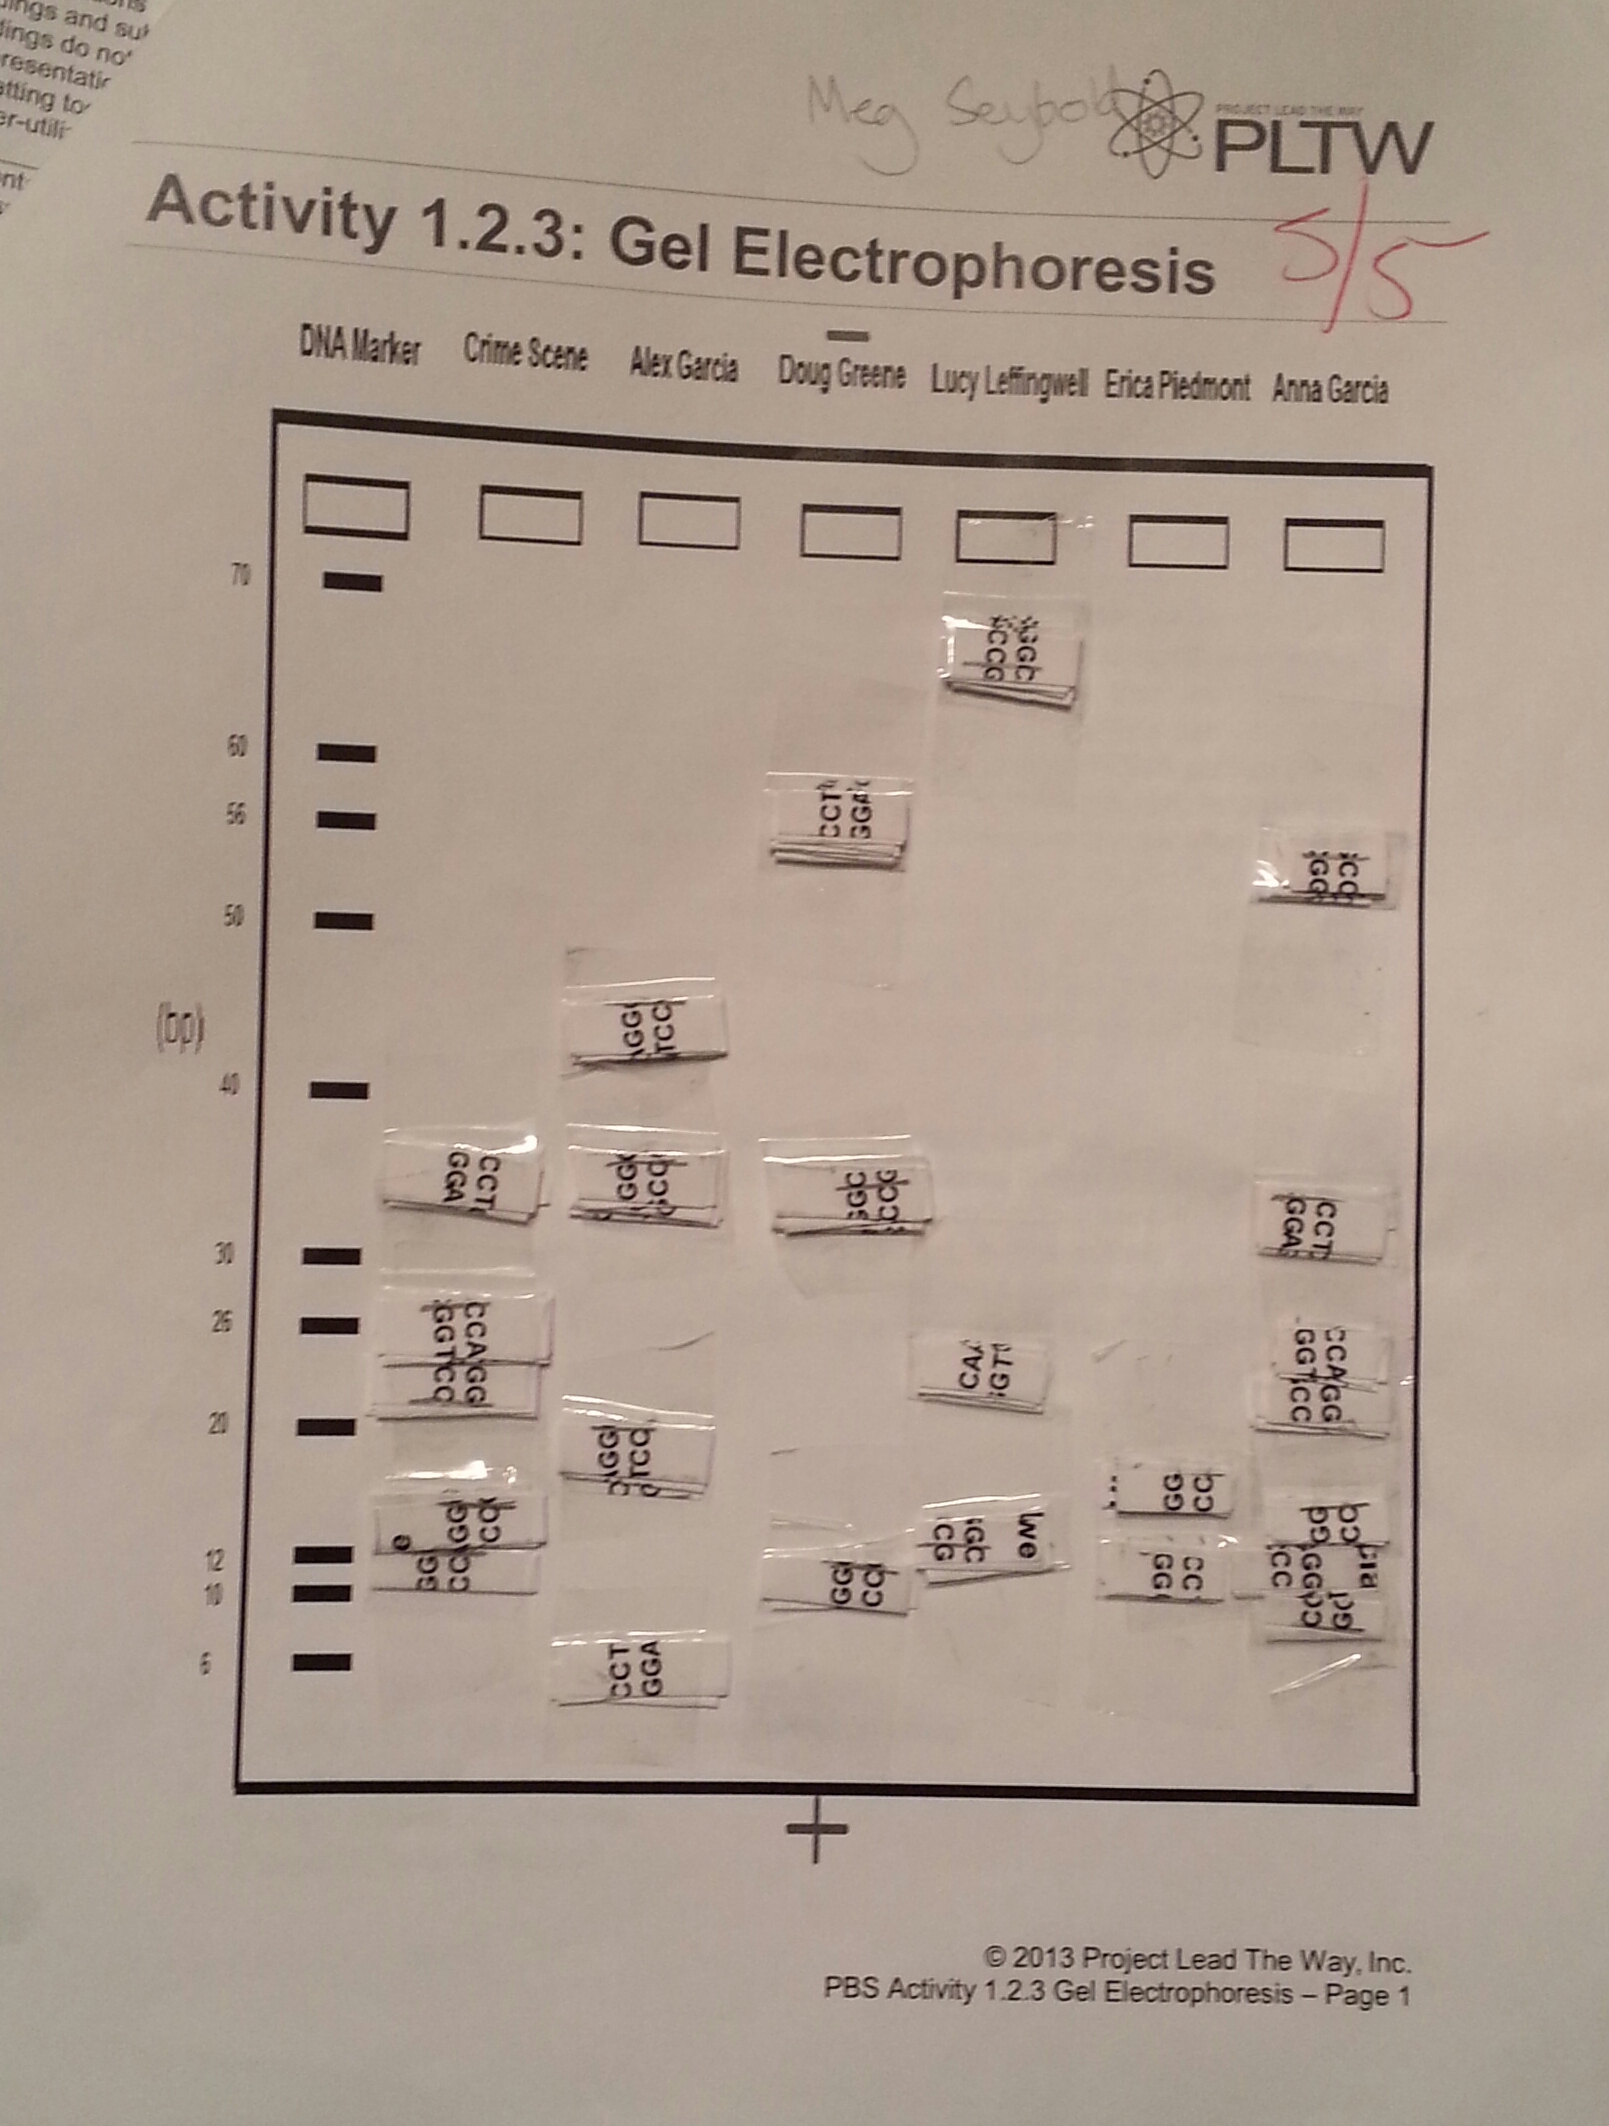 PBS Classroom Activities - Meg Seybold, Project Lead the Way For Gel Electrophoresis Worksheet Answers